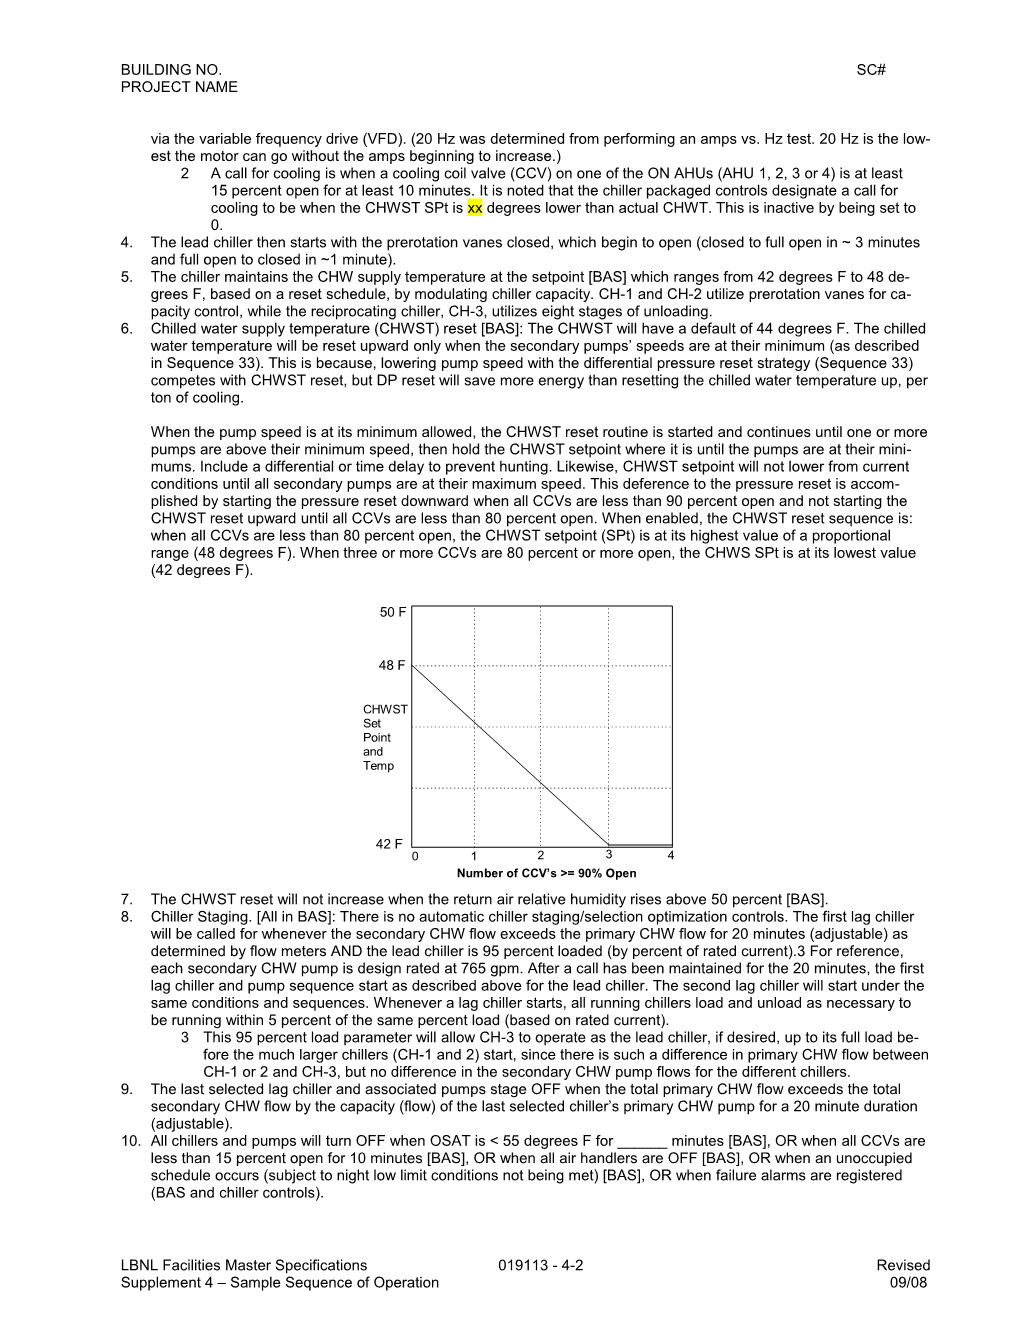 Section 019113 - Supplement 4 - Sample Sequence of Operation